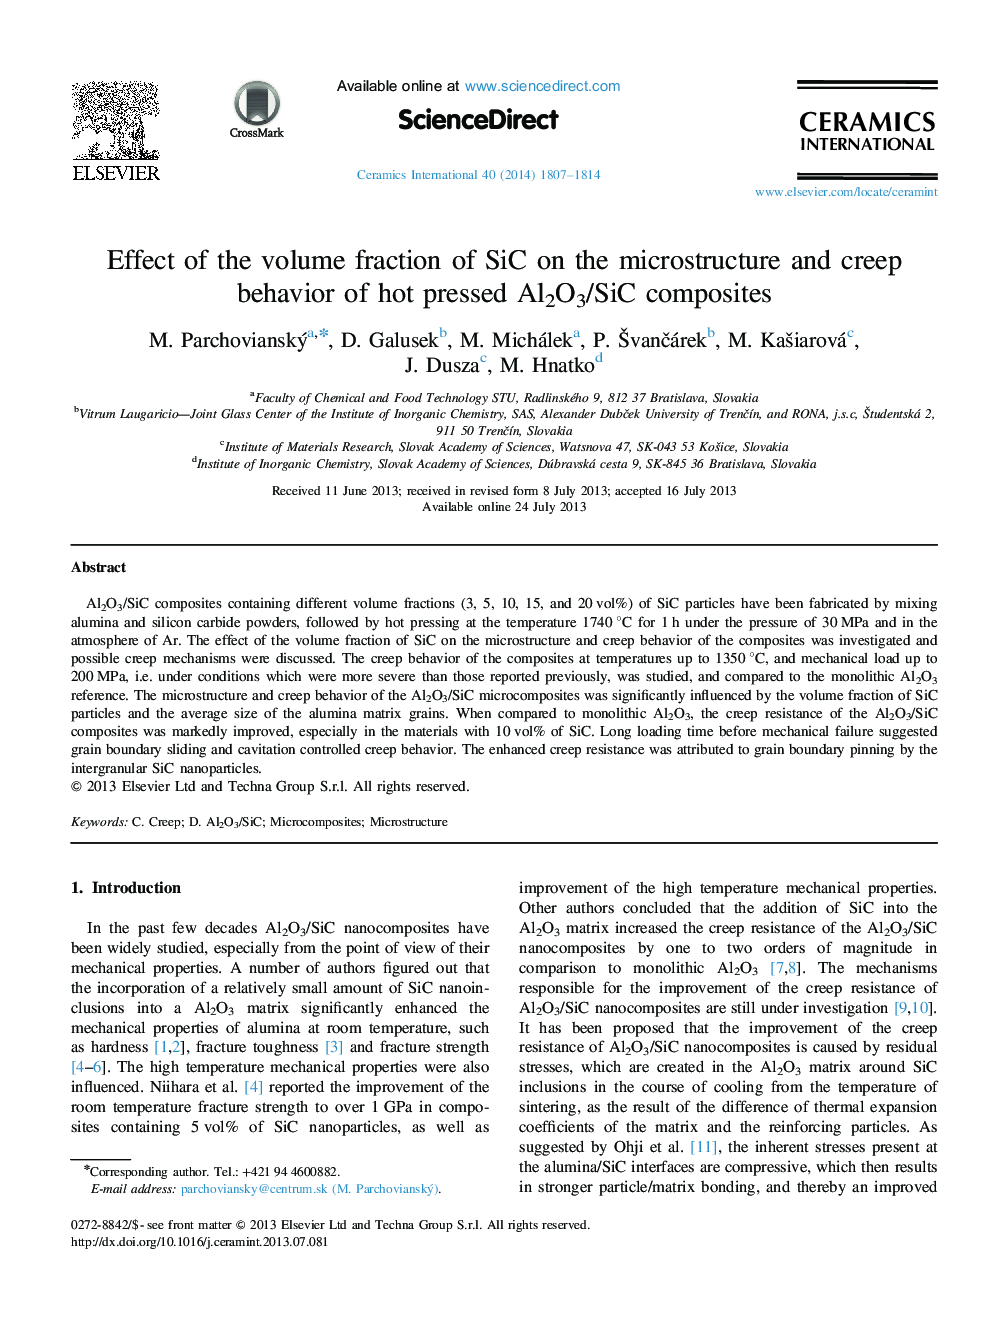 Effect of the volume fraction of SiC on the microstructure and creep behavior of hot pressed Al2O3/SiC composites